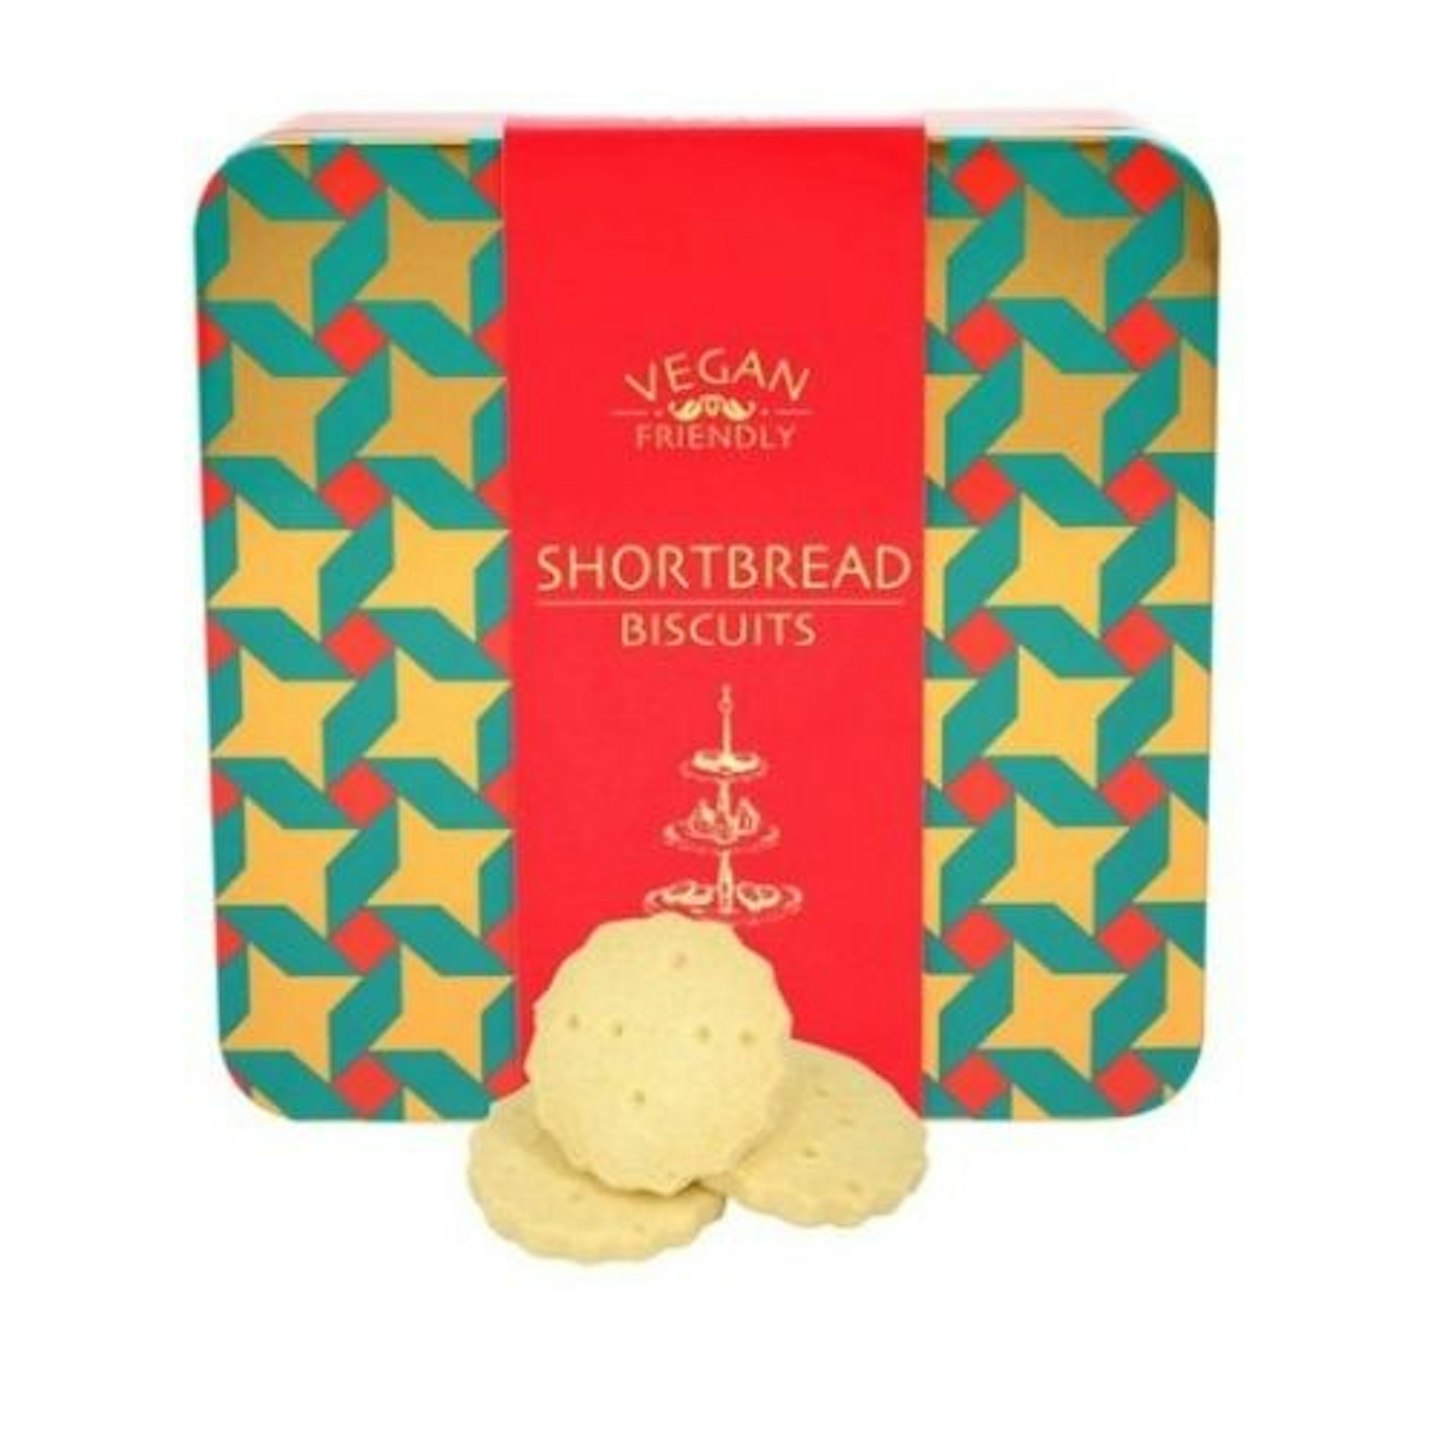 Silver Crane Vegan Tin Filled with 200g Shortbread Biscuits